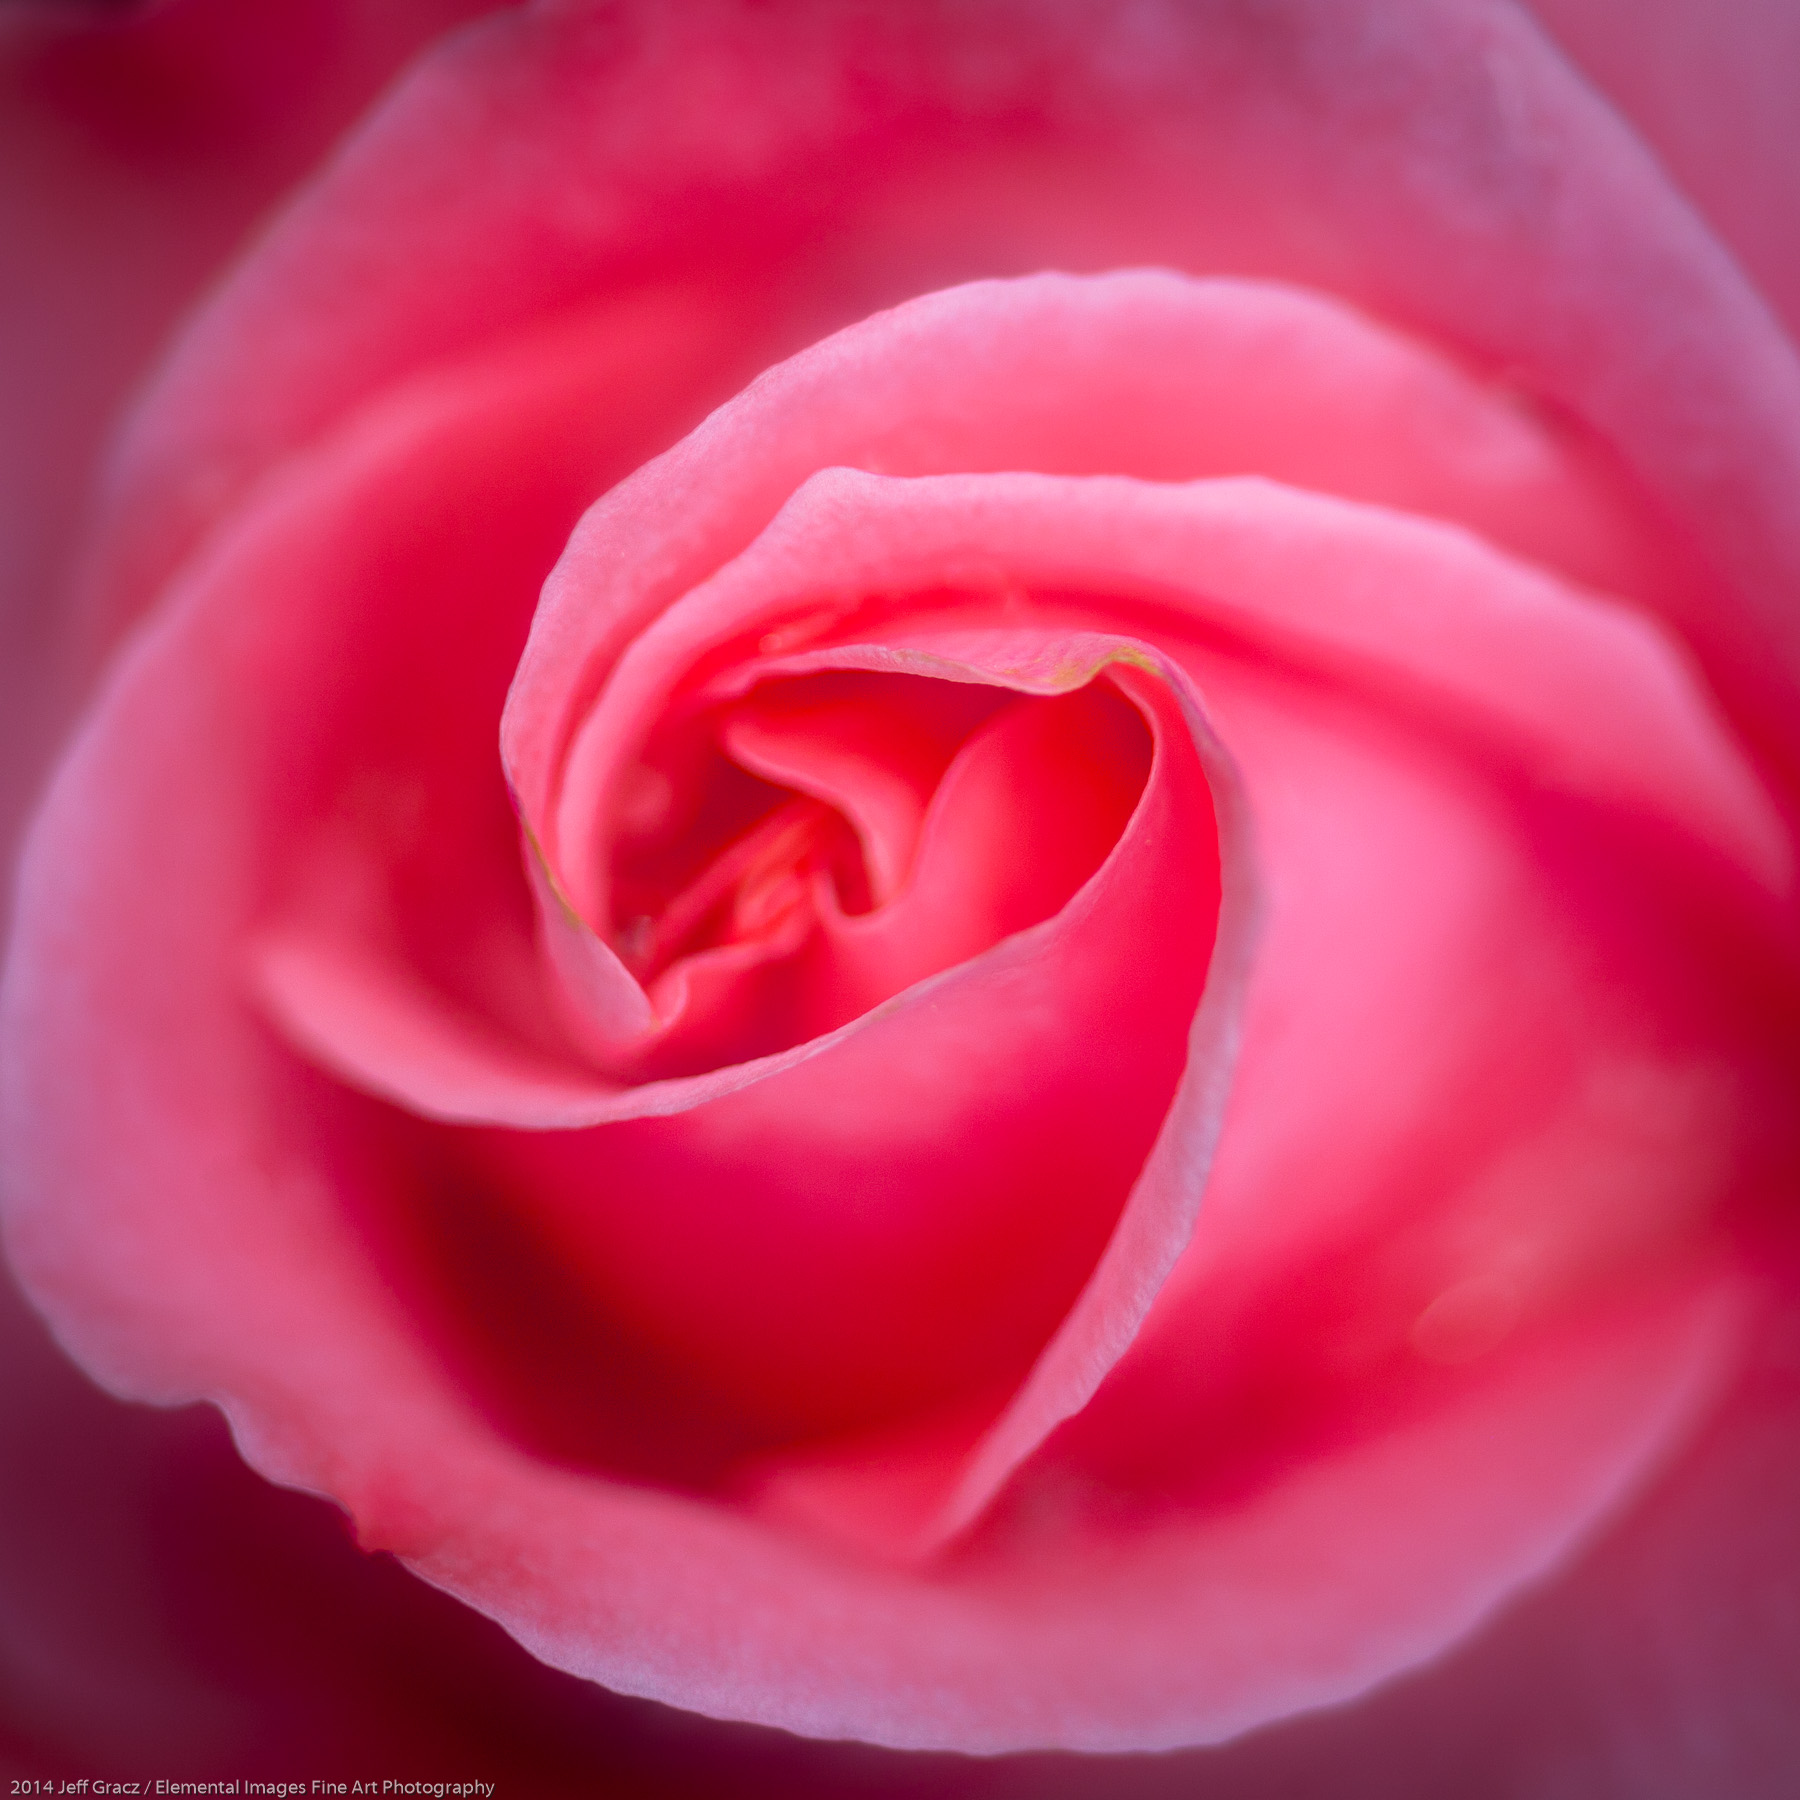 Roses LVI | Portland | OR | USA - © 2014 Jeff Gracz / Elemental Images Fine Art Photography - All Rights Reserved Worldwide